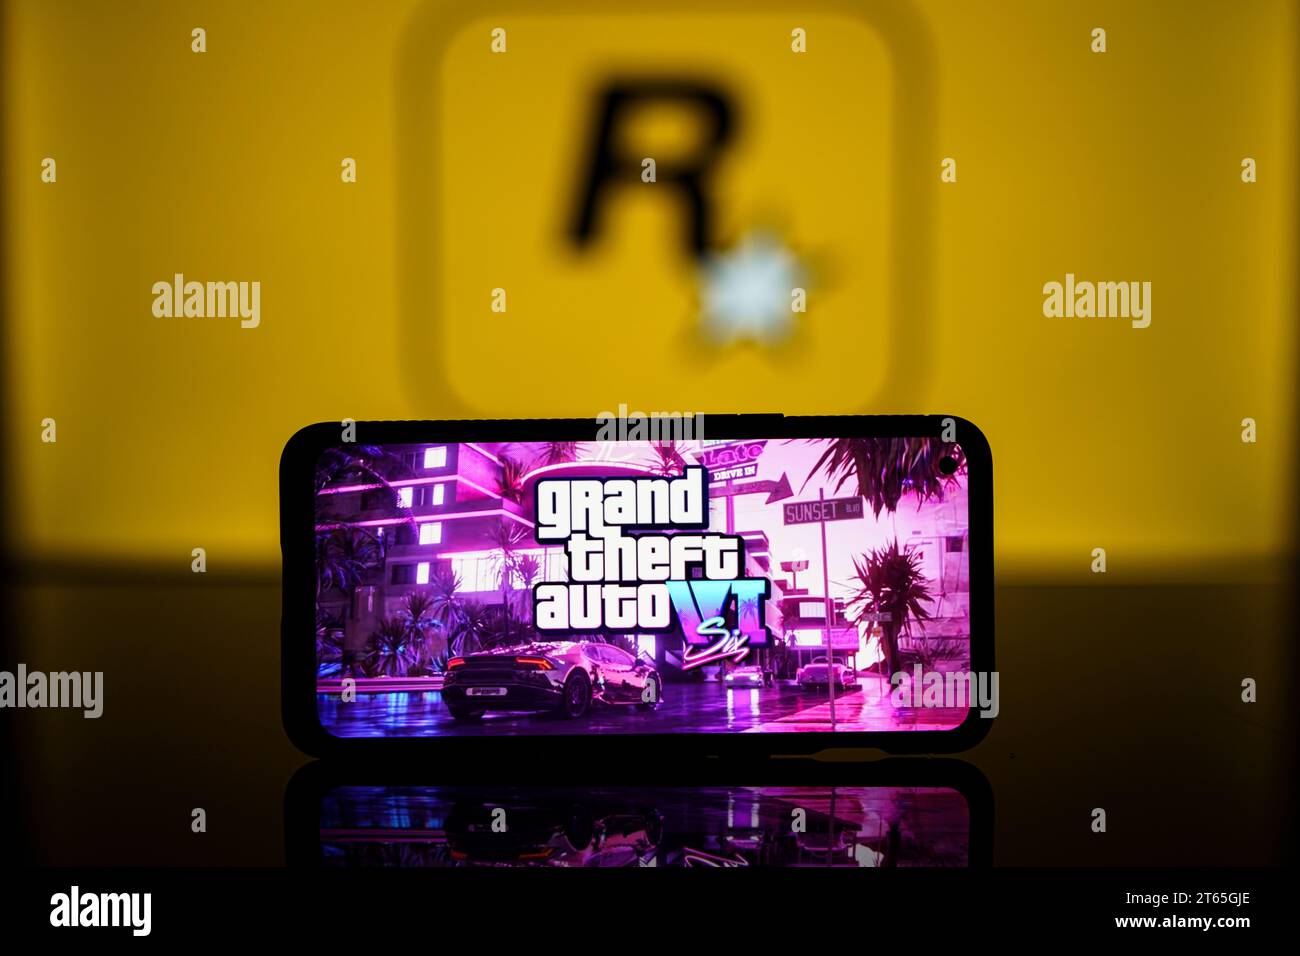 GTA VI logo and Rockstar games company logo in background on screen. Rockstar games announces to release GTA SIX video game Stock Photo